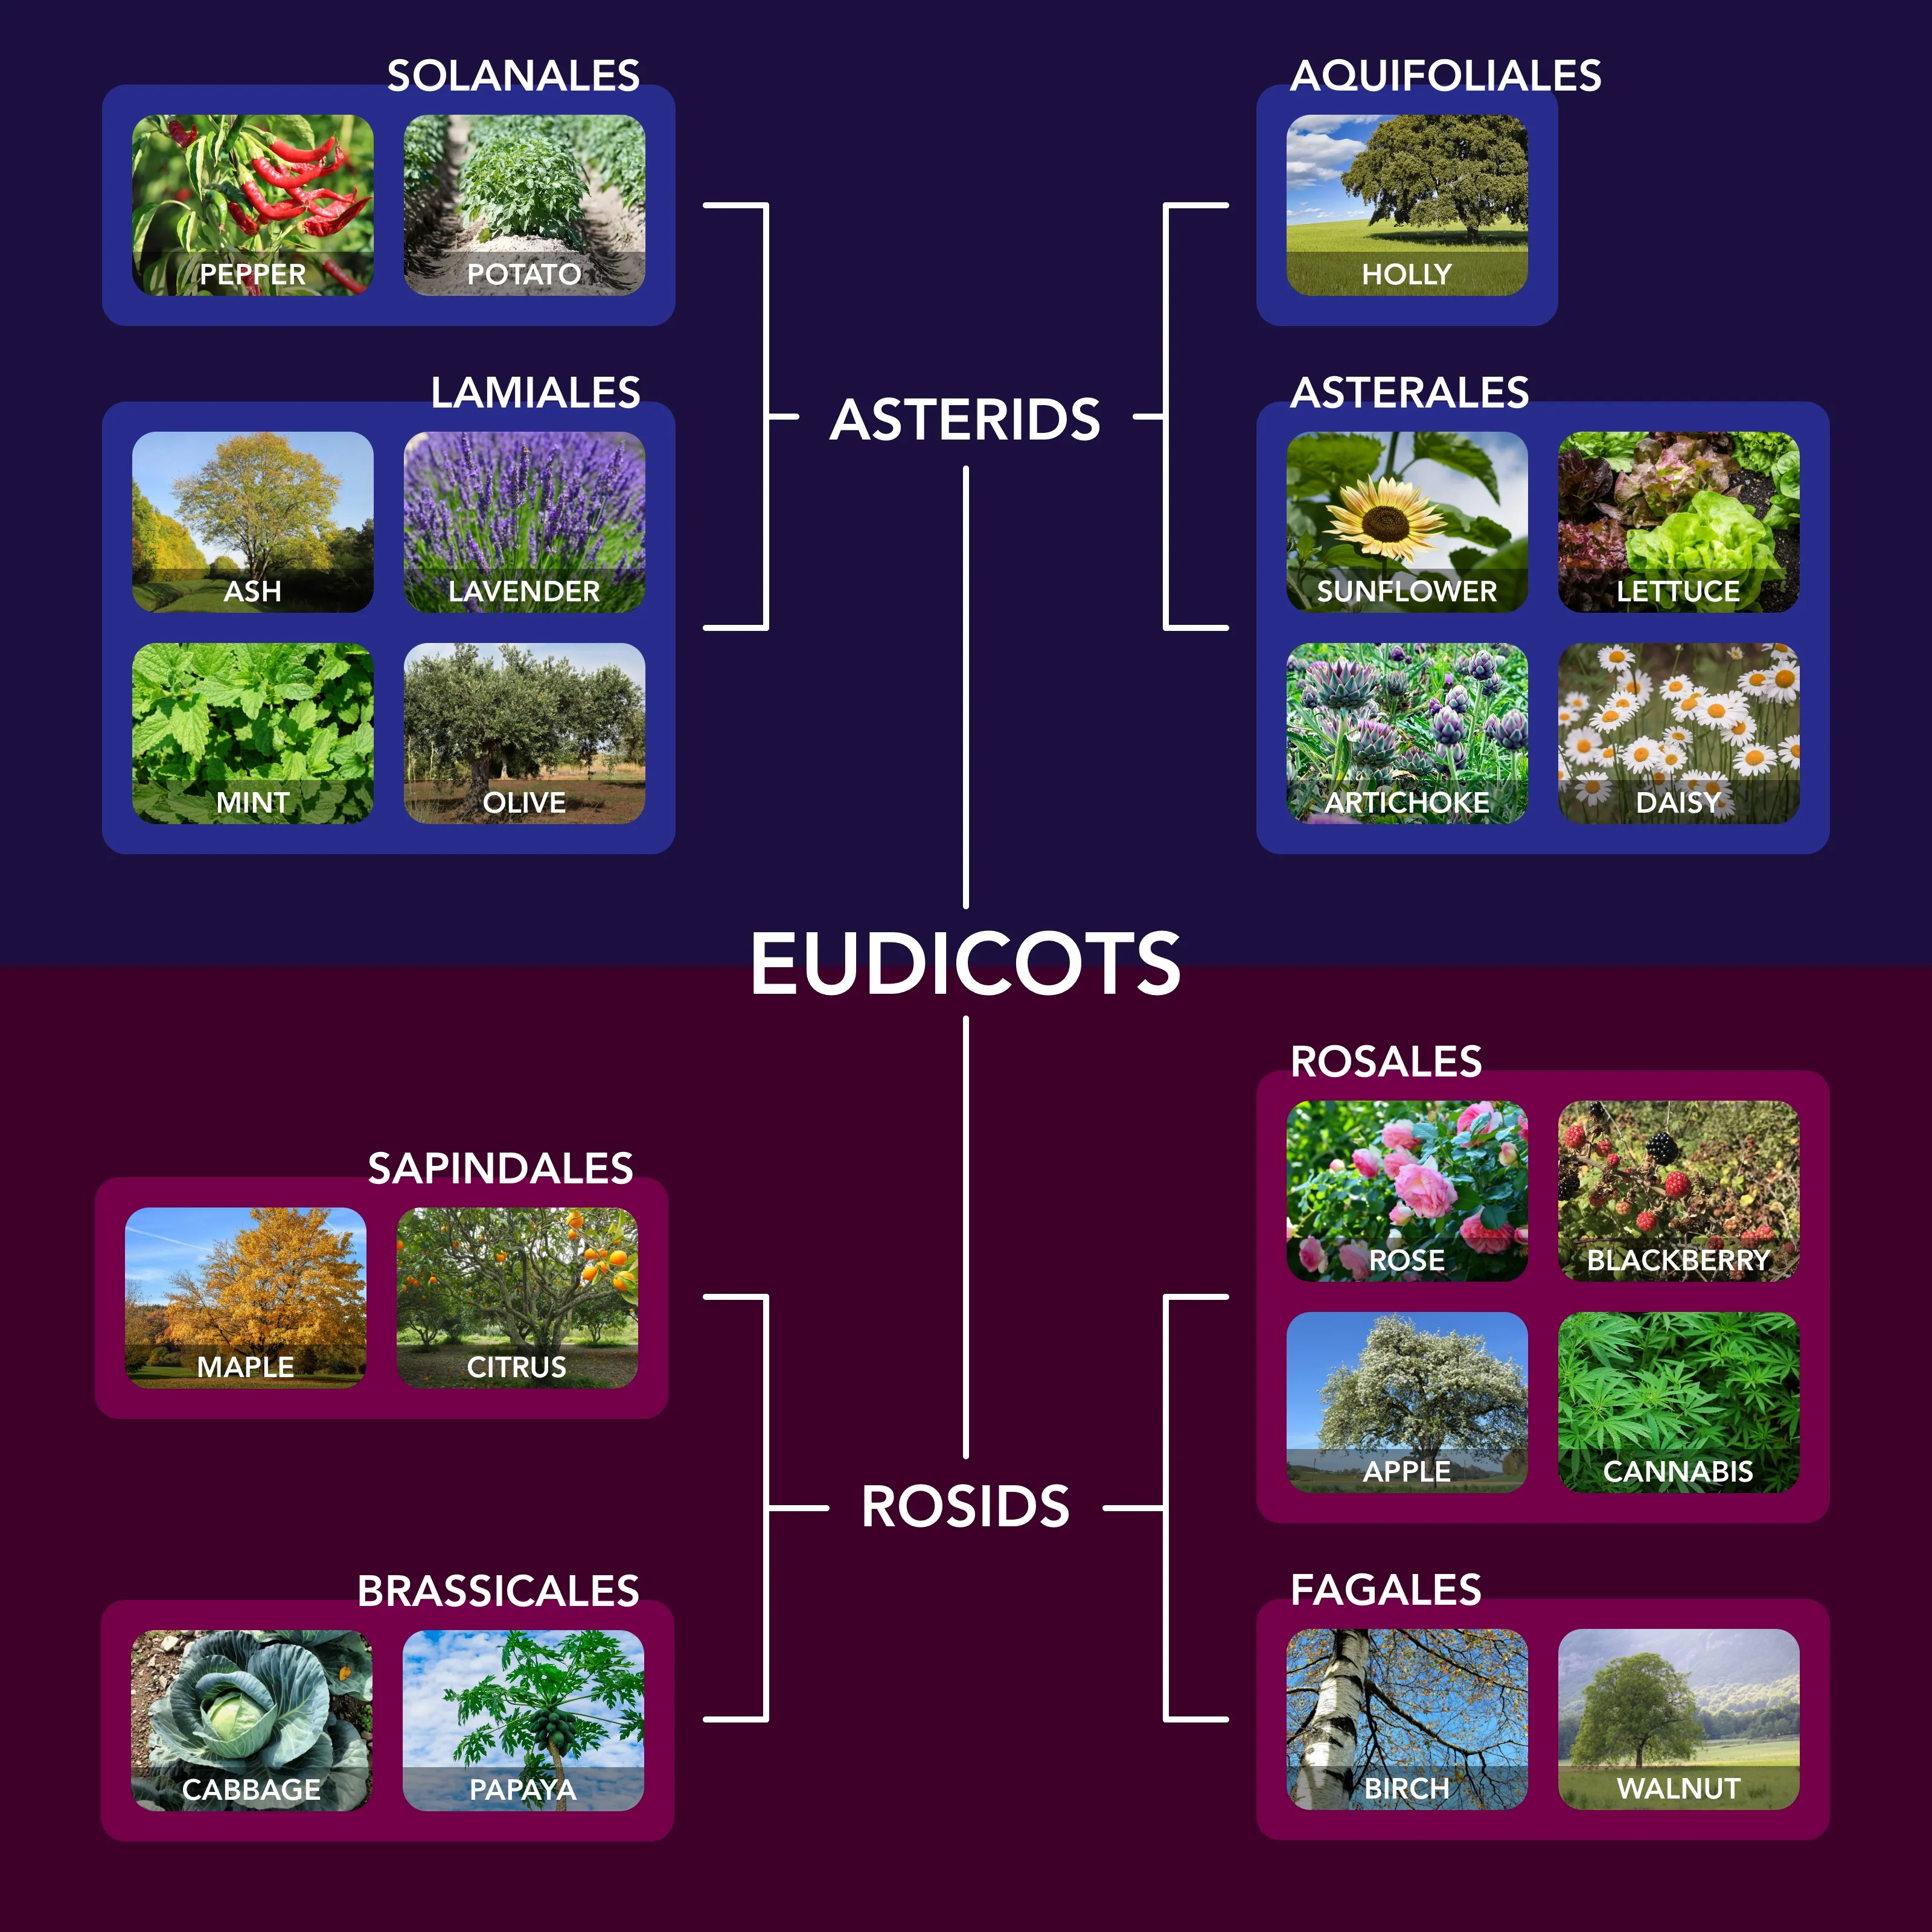 A family tree of various plants. Clade asterids contains the orders solanales (peppers, potatoes) and lamiales (ash, lavender, mint, olive) one one side, and orders aquifoliales (holly) and asterales (sunflower, lettuce, artichoke, daisy) on the other. Clade rosids contains orders sampindales (maple, citrus) and brassicales (cabbage, papaya) on one side, and orders rosales (rose, blackberry, apple, cannabis) and fagales (birch, walnut) on the other.